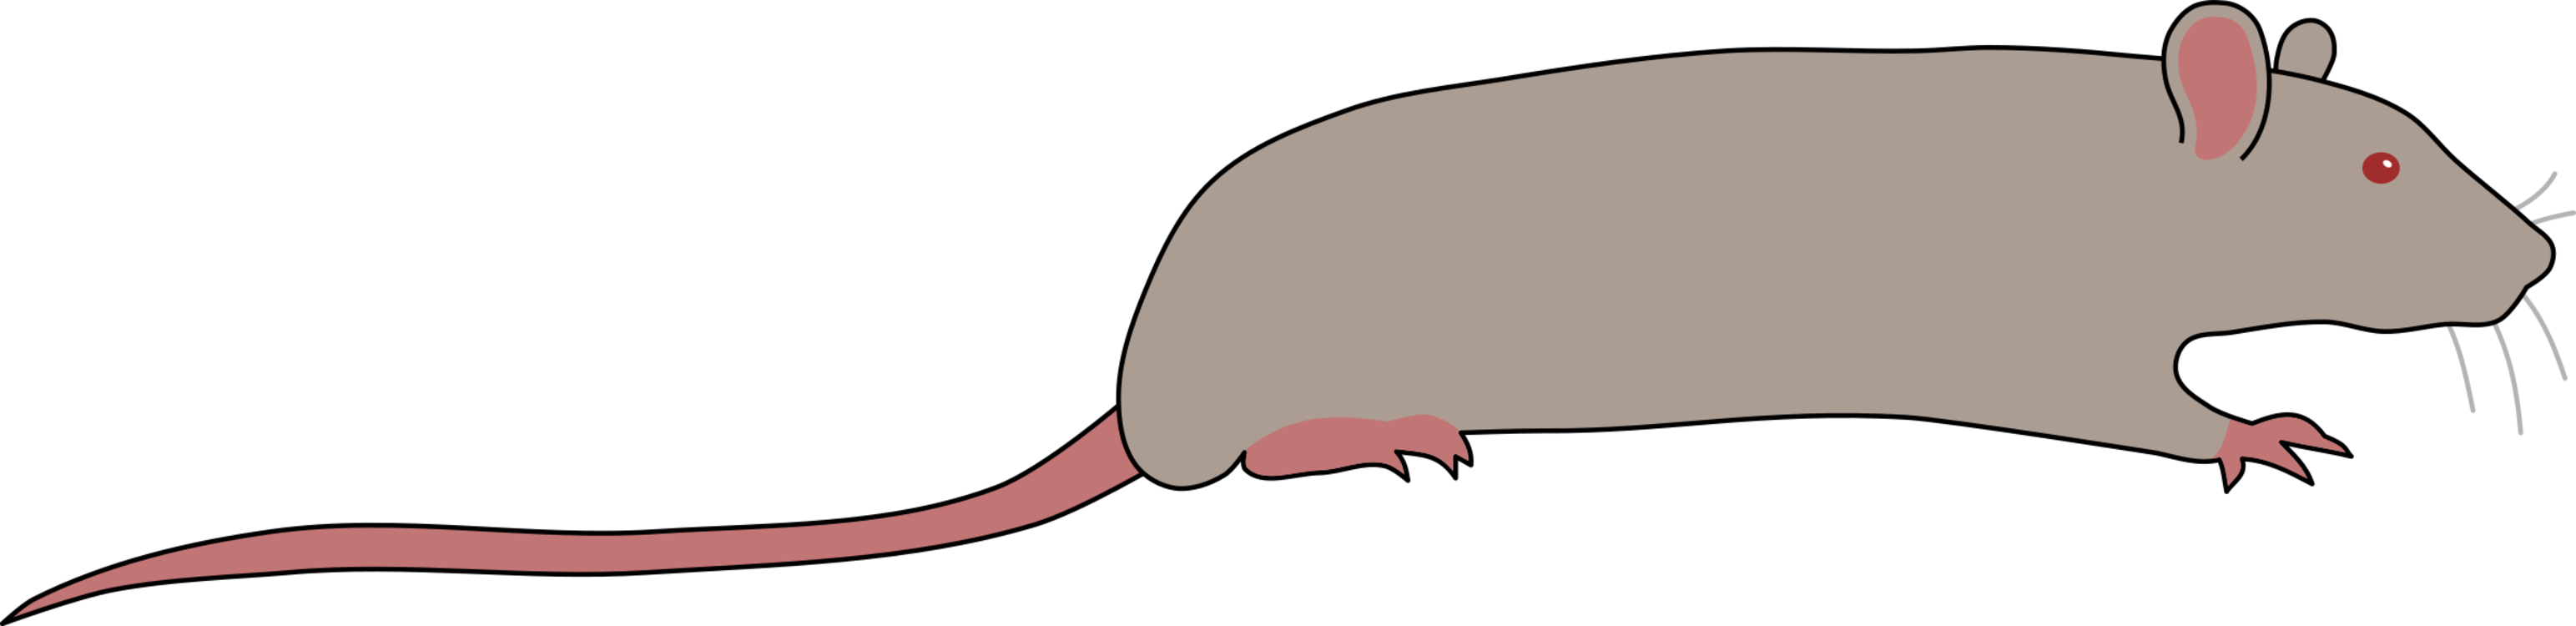 Snout,Muridae,Neck